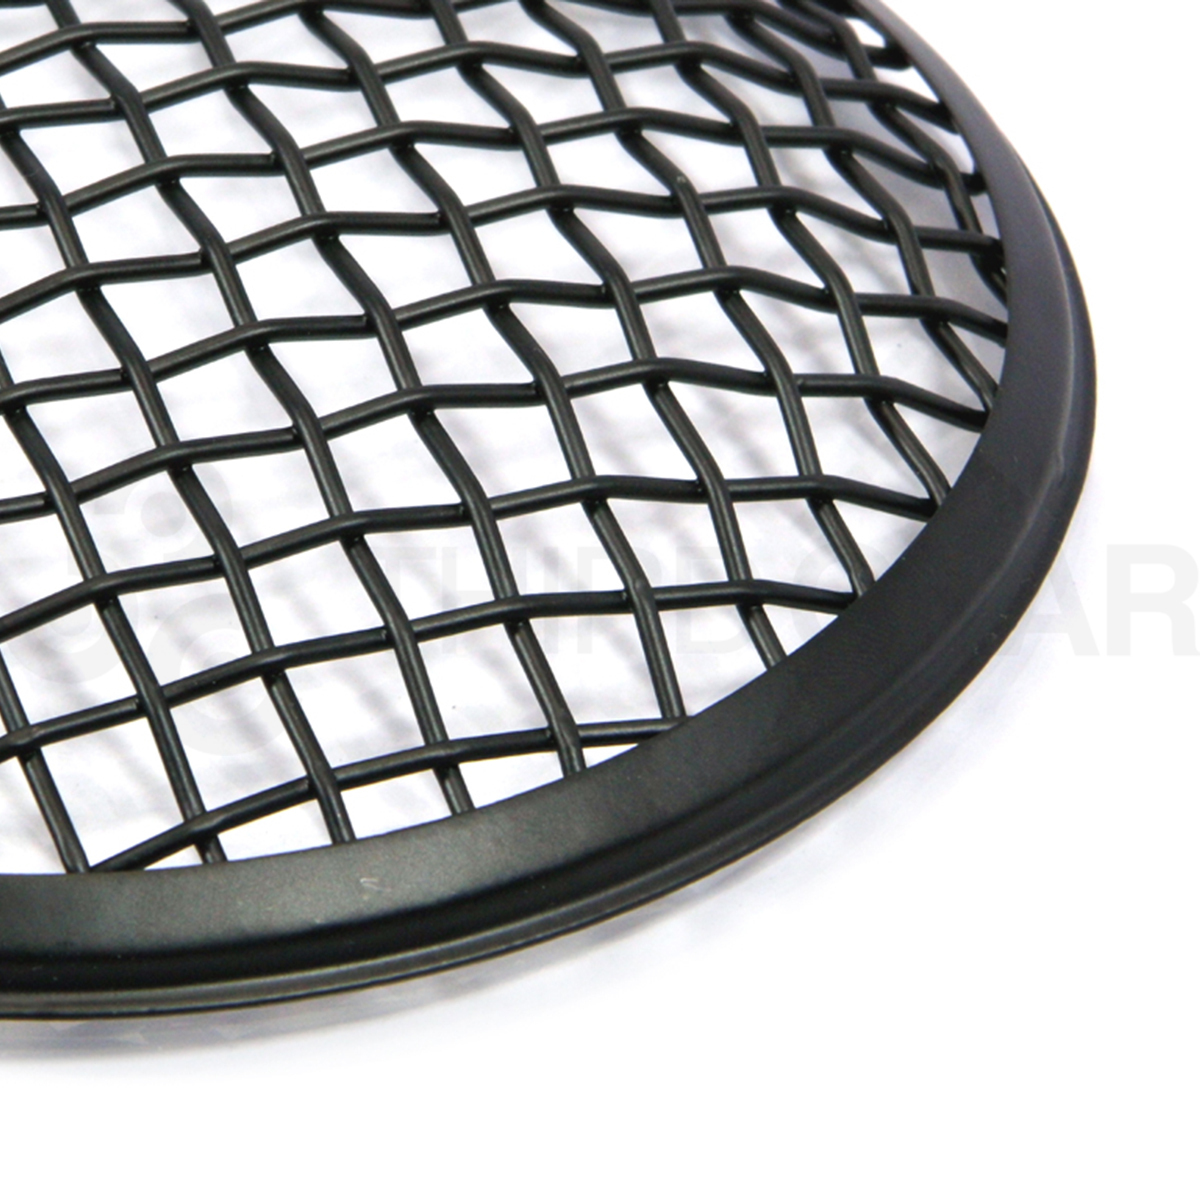 Motorcycle 7 Headlight Mesh Grill Side Mount Universal Cover Mask for Cafe Racer plating 